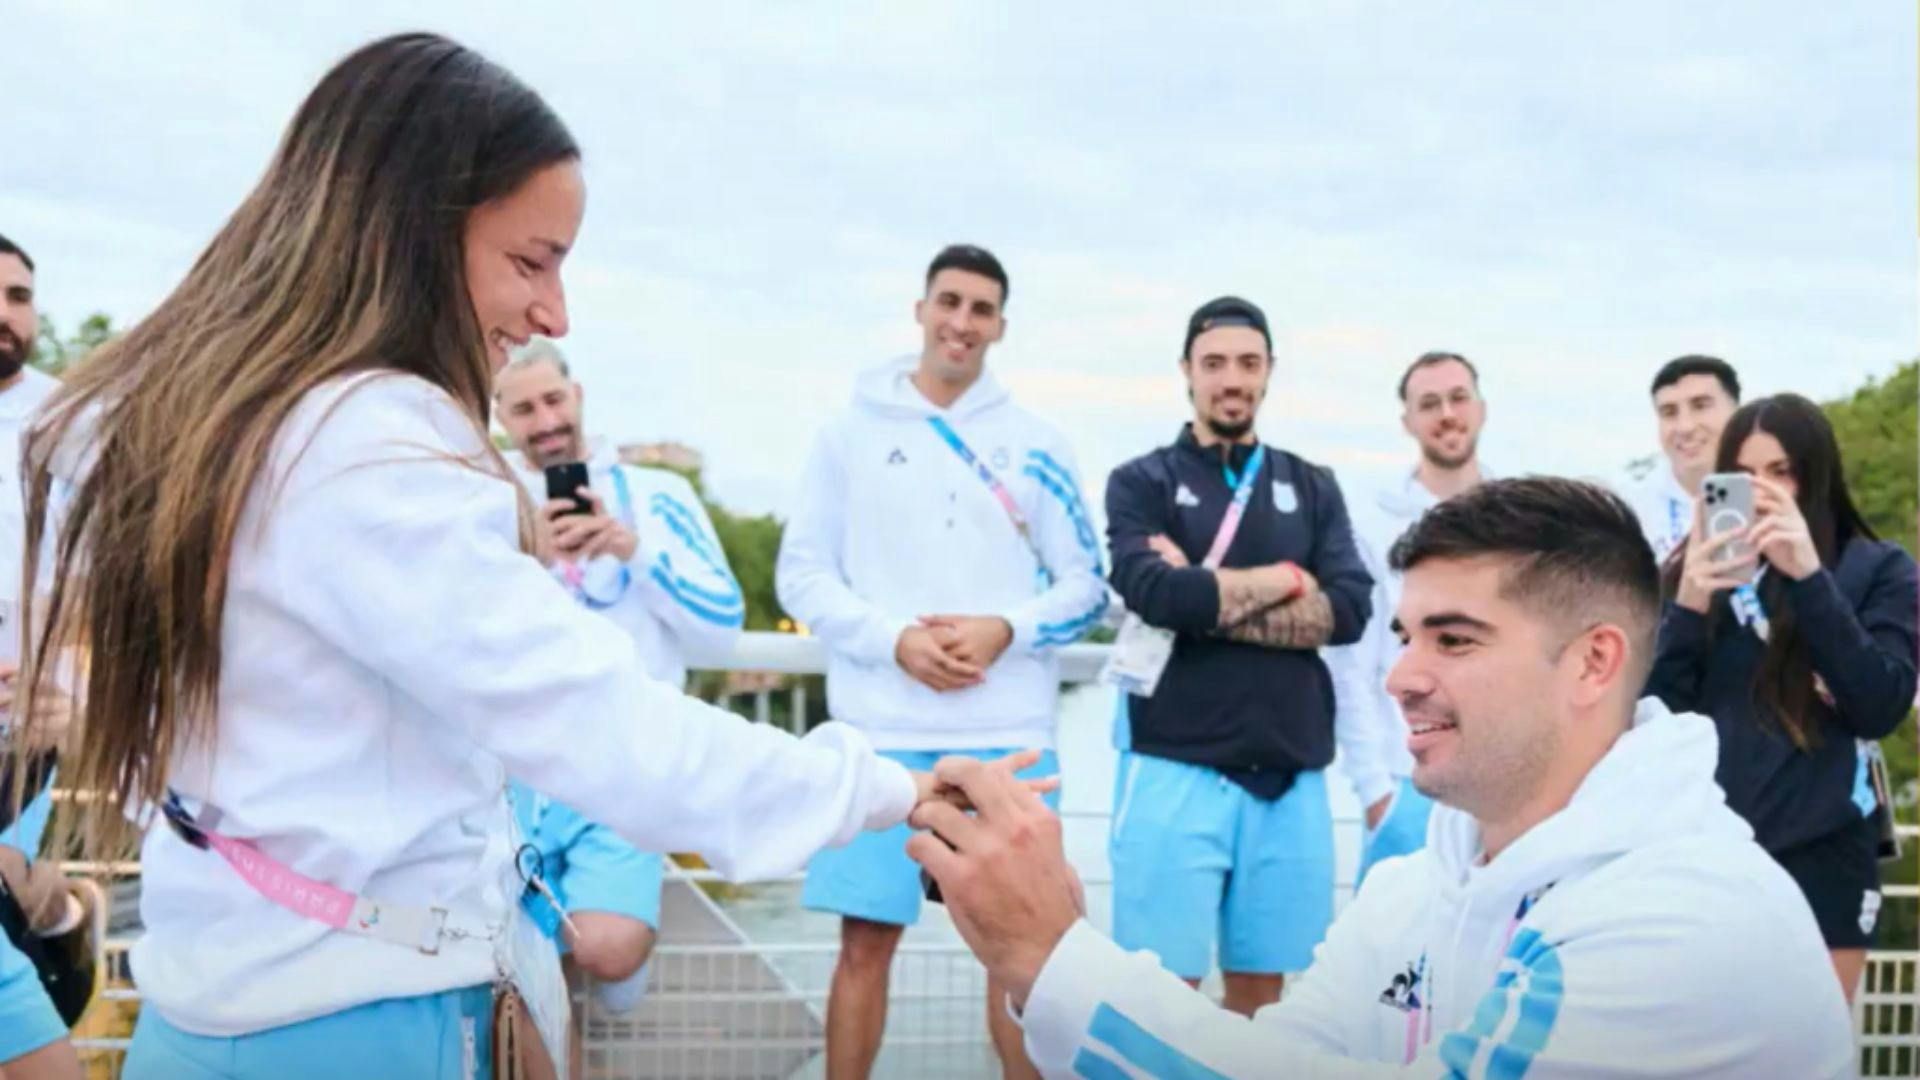 Love in Paris: Argentinian Olympian couple  got engaged in the Olympic Village